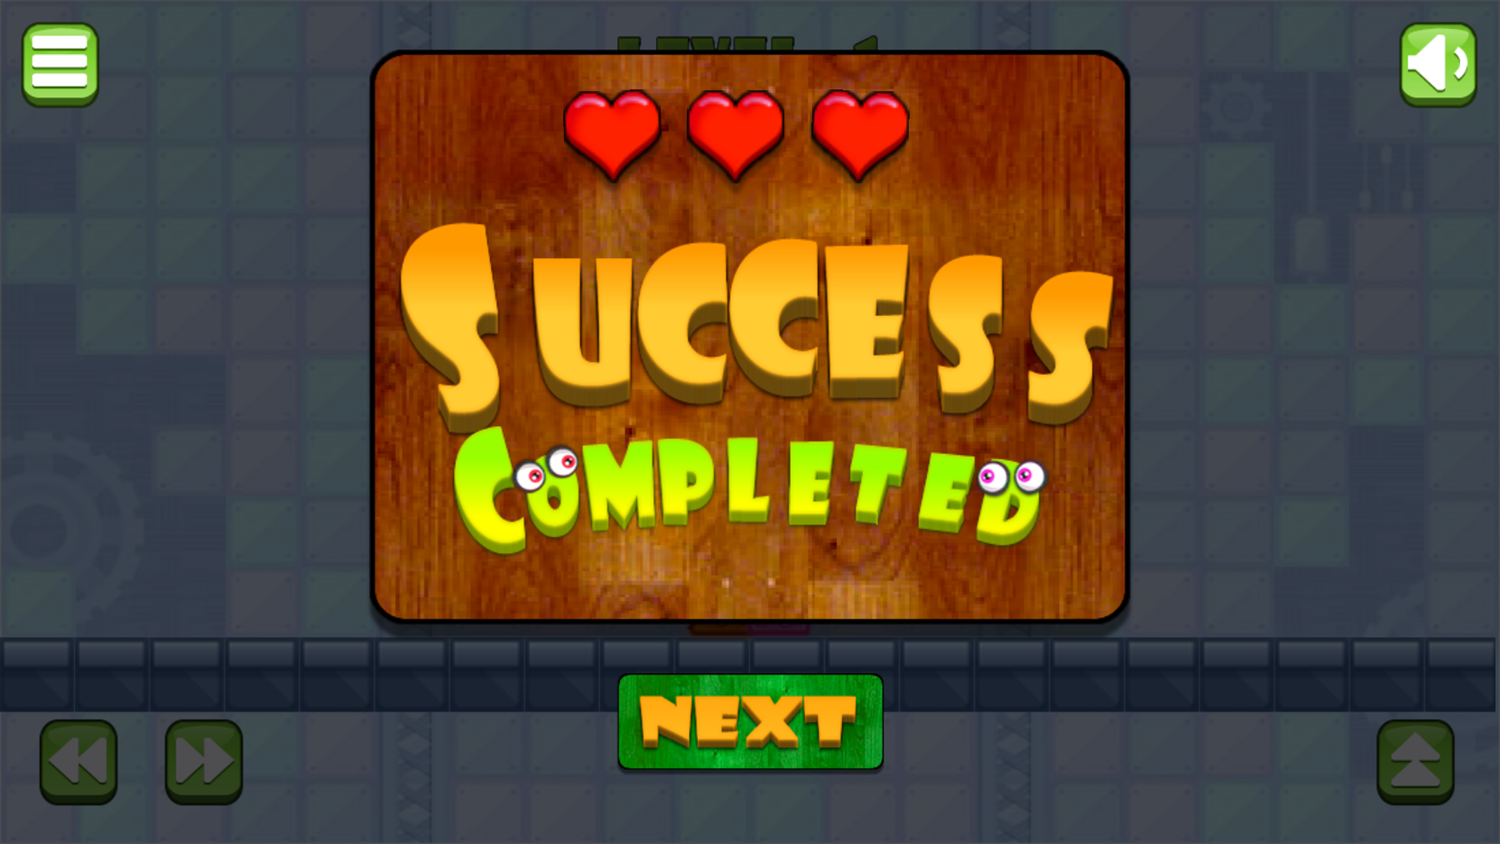 Two Squares Game Success Completed Screenshot.